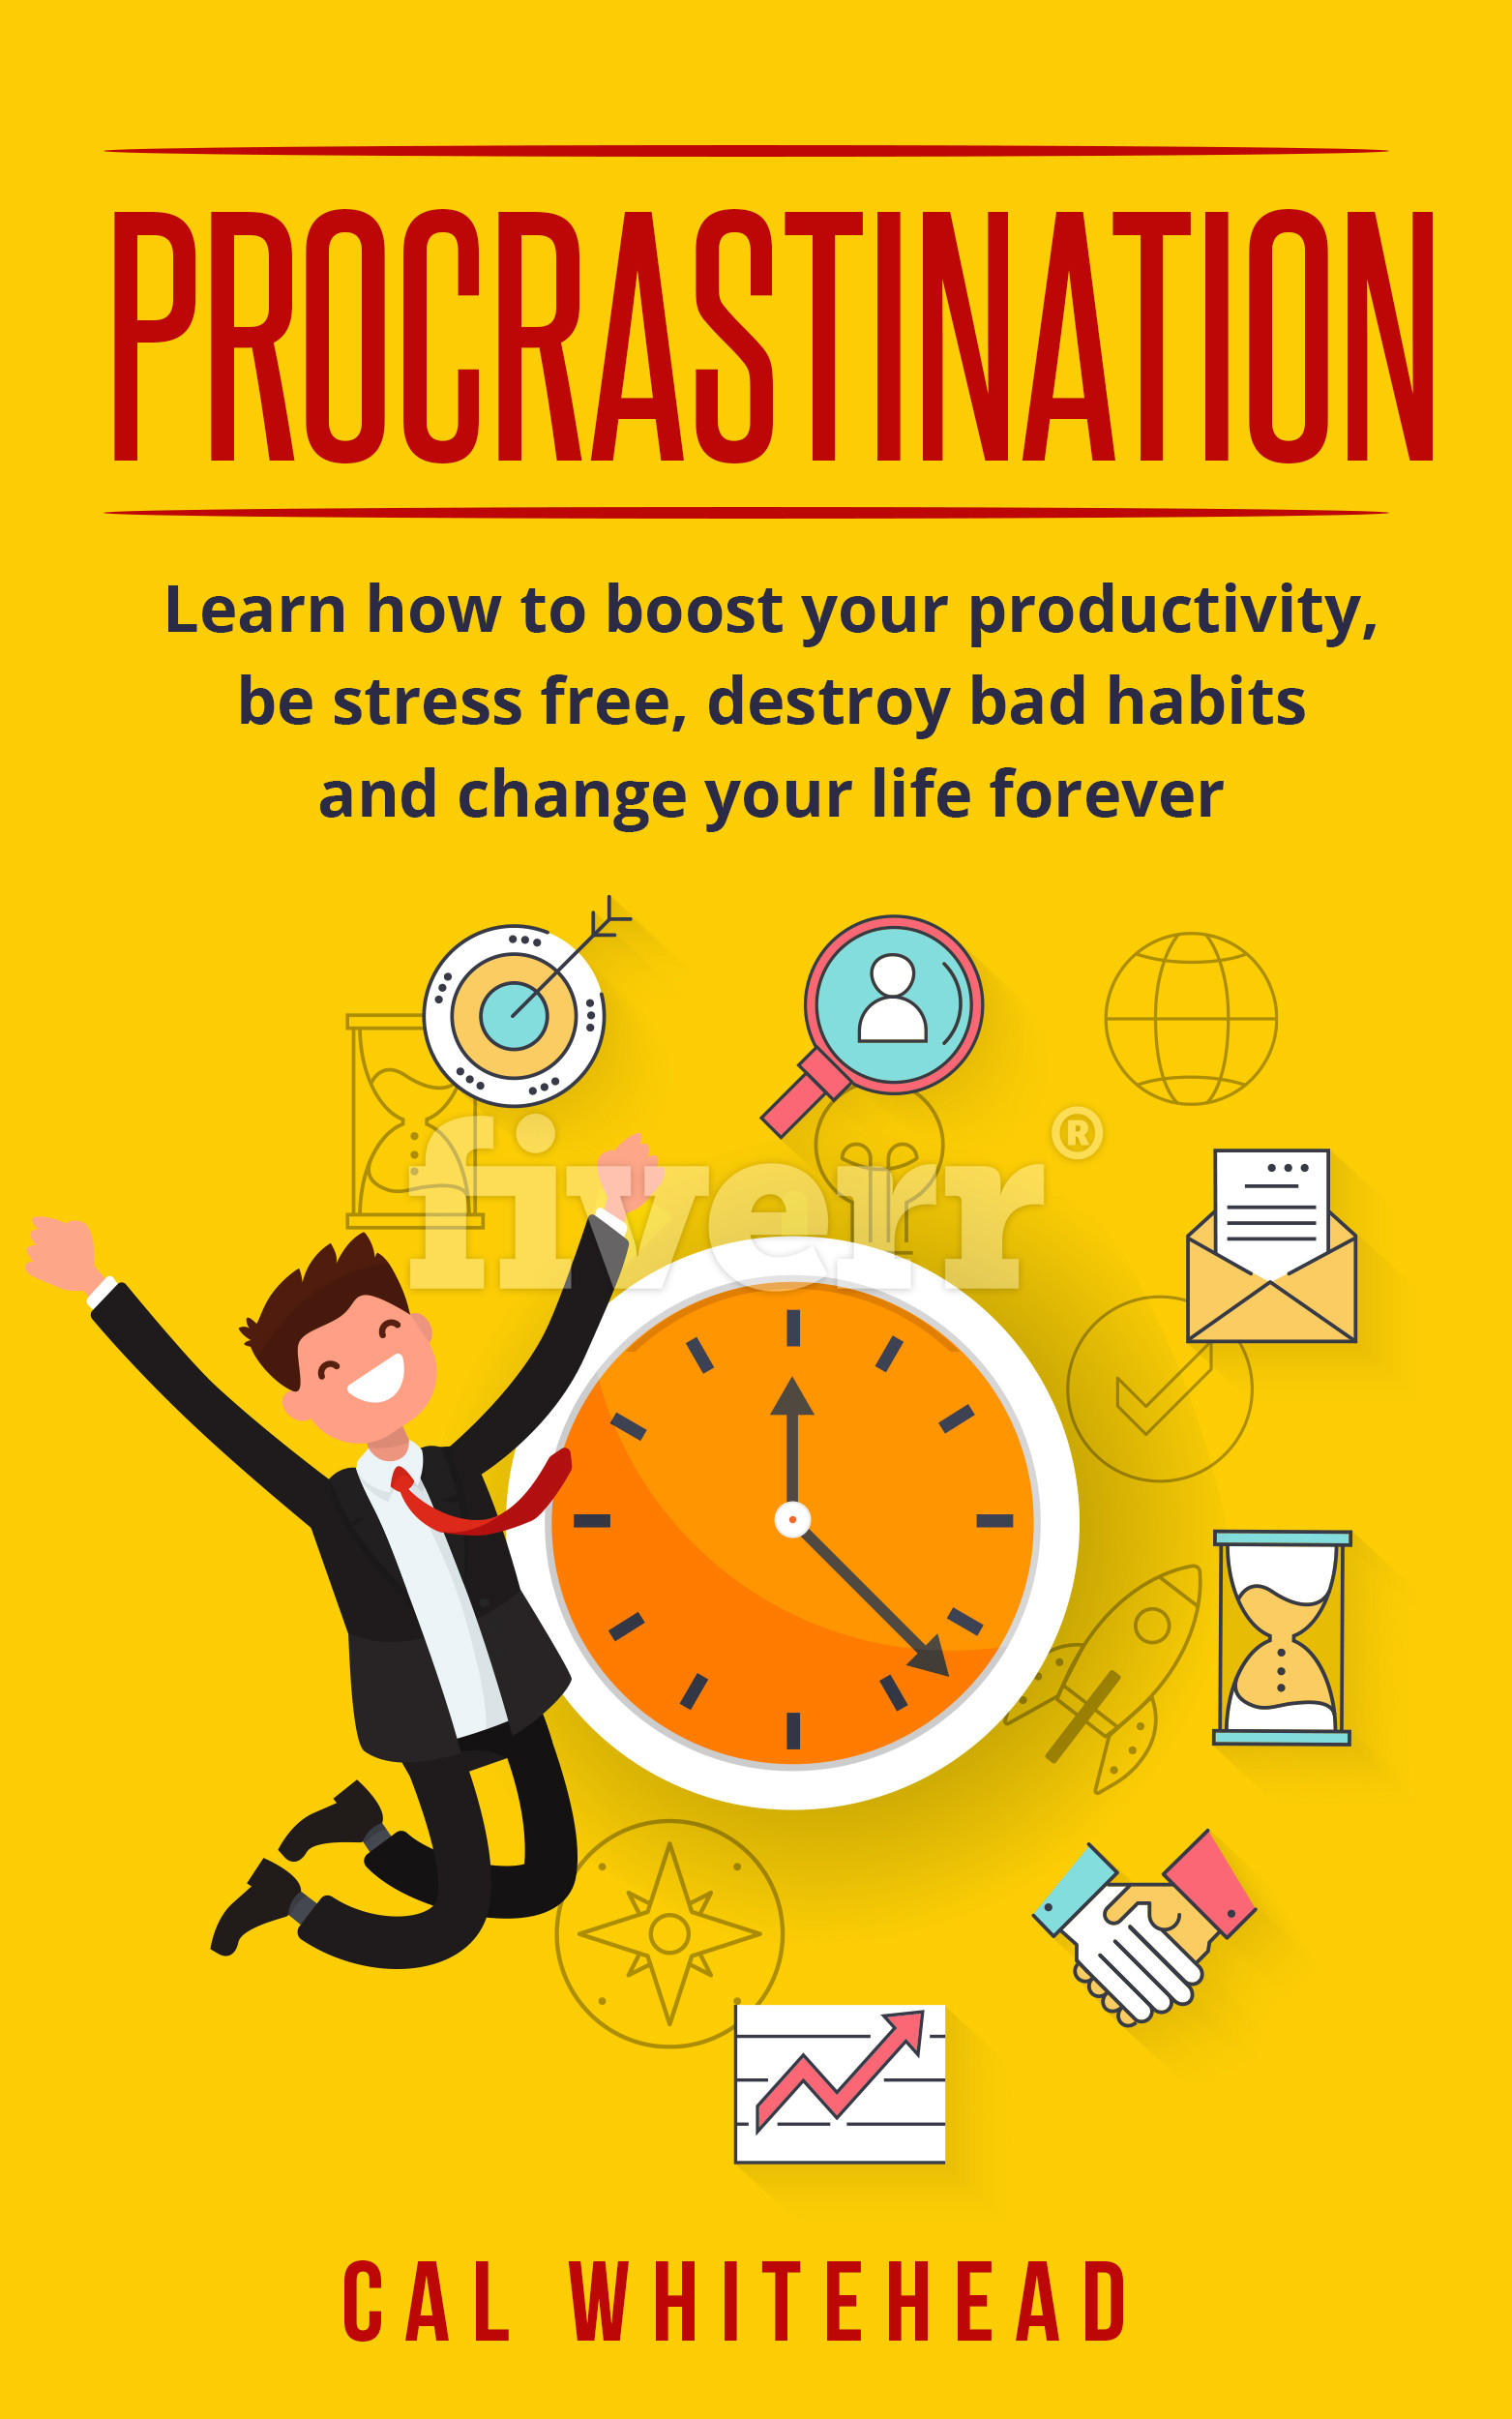 FREE: Procrastination: Learn How To Boost Your Productivity, Be Stress Free, Destroy Bad Habits And Change Your Life Forever by Cal Whitehead